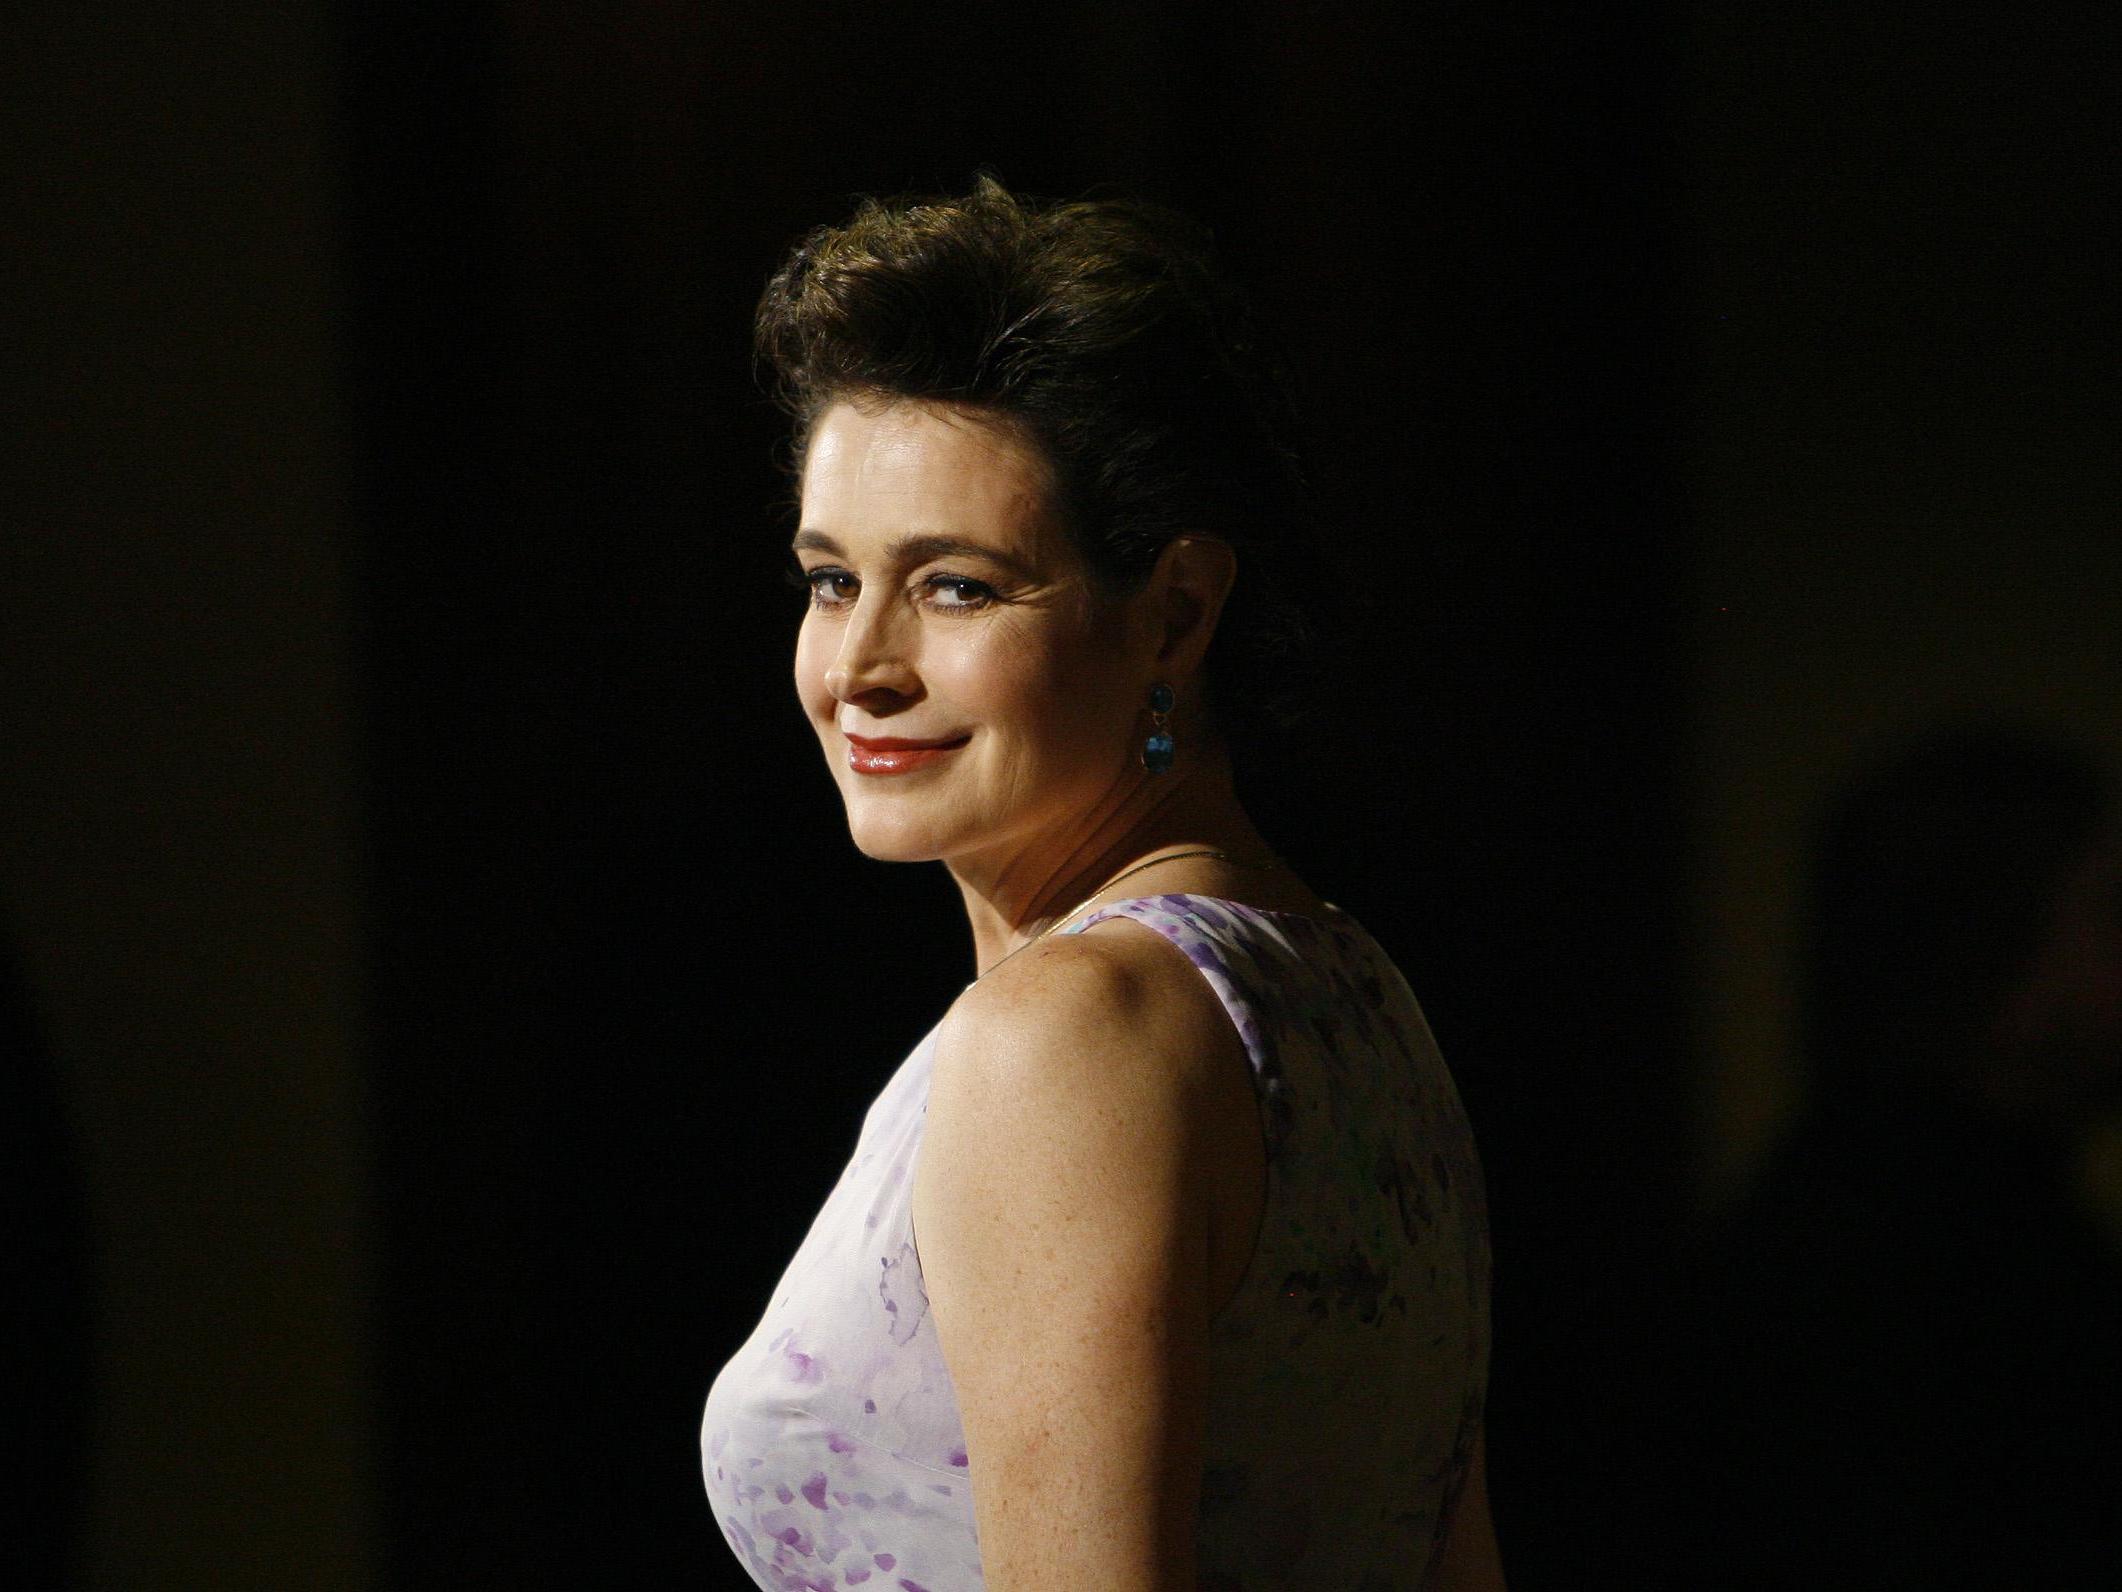 Actress Sean Young poses at the 60th Annual Directors Guild of America Awards in Century City, California on January 26, 2008.